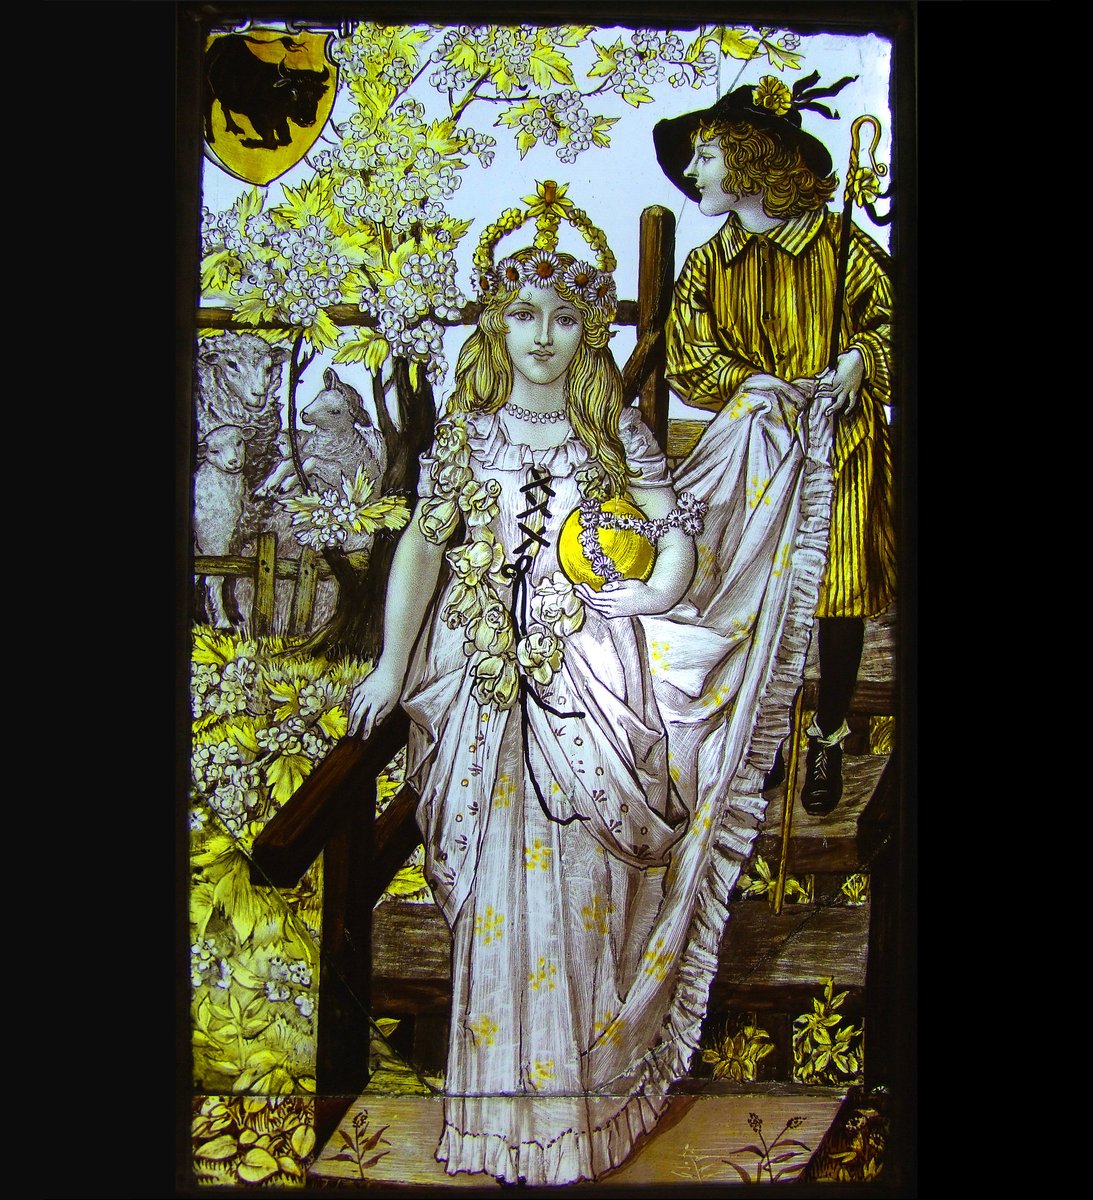 May has begun with such a beautiful day here in east Suffolk. To celebrate, here's Thomas Parlby's Queen of the May, made in 1900 by Thomas Cowell of Powell & Sons, and now in the @stainedglassmus, Ely.